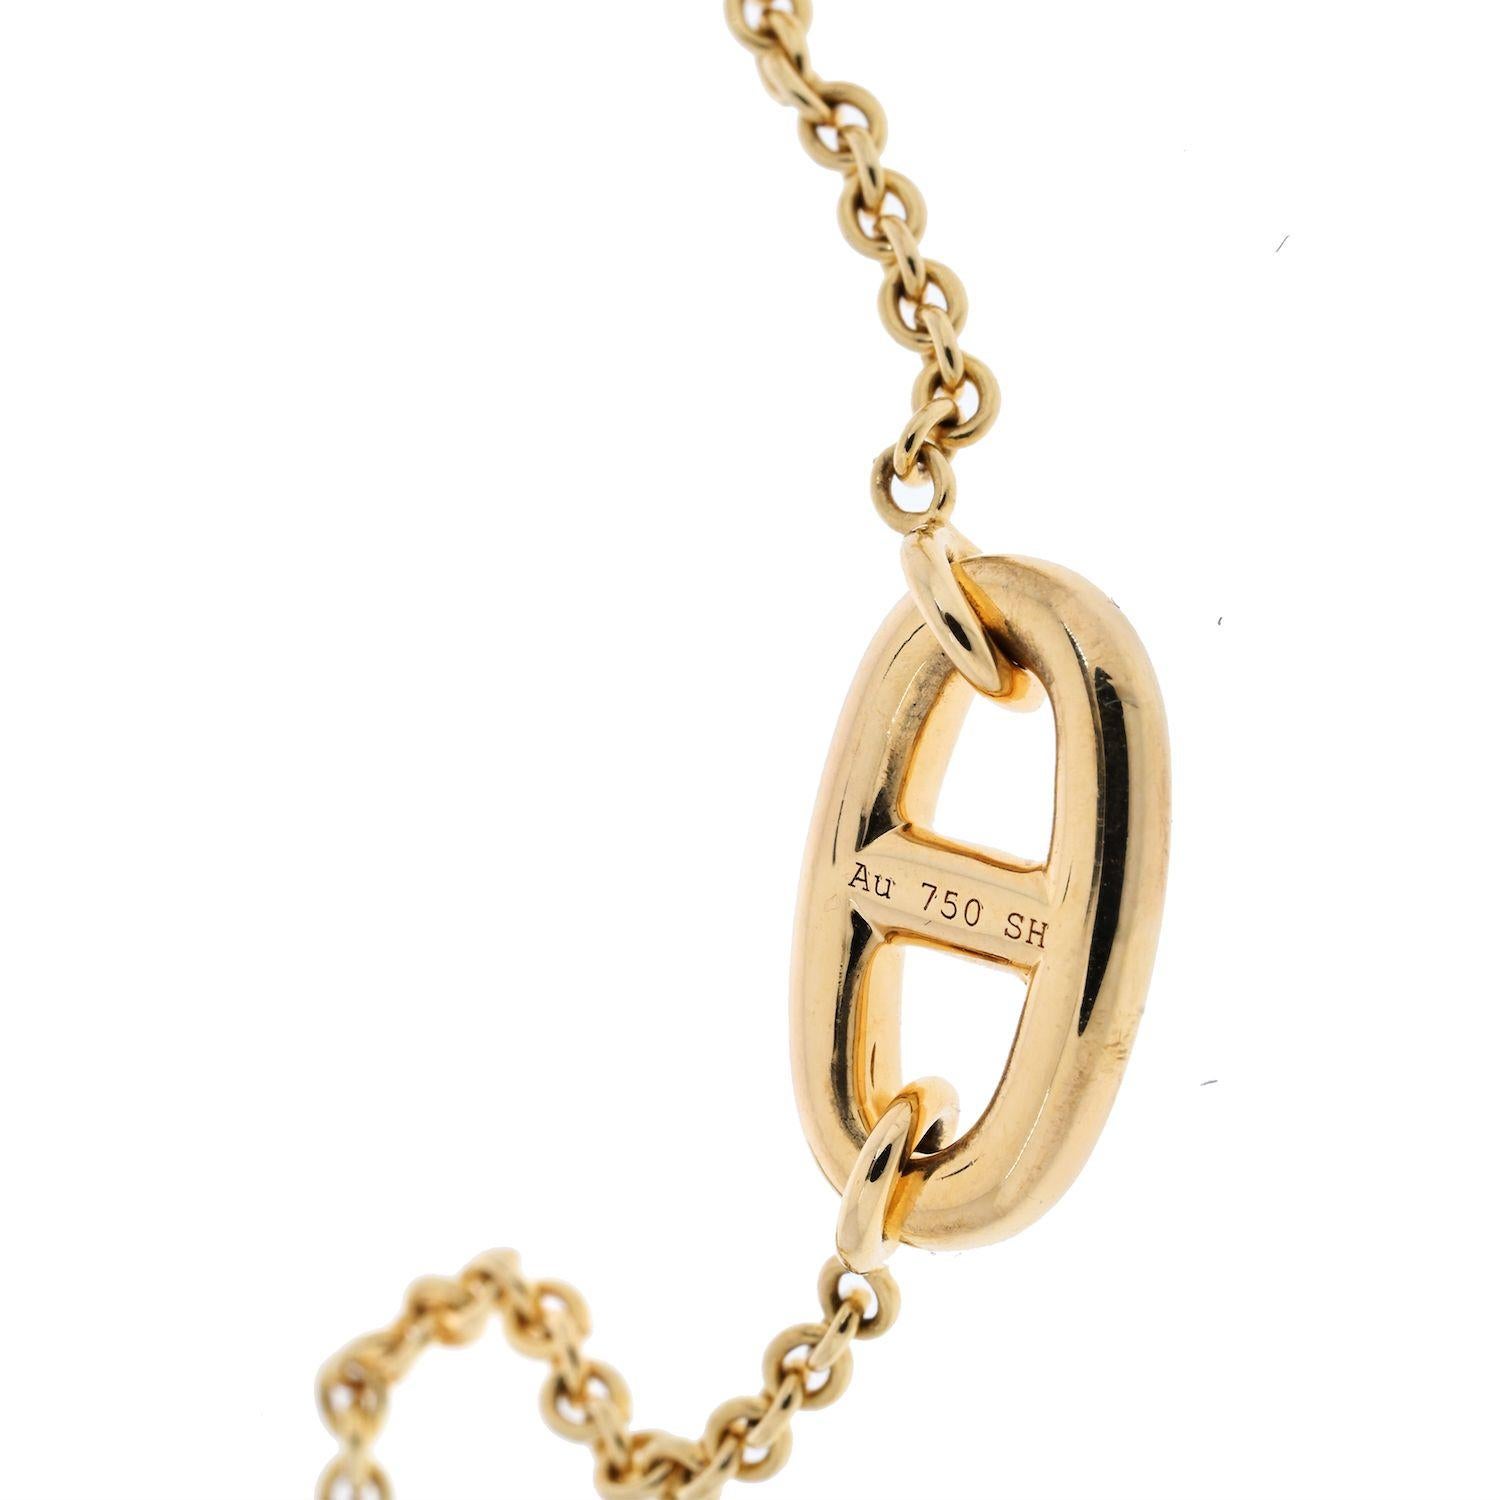 This chic Hermes bracelet from the Farandole collection features a chain and oval link design crafted in 18k rose gold and completed with a toggle closure. Made in France circa 2010s. 

6 inches.